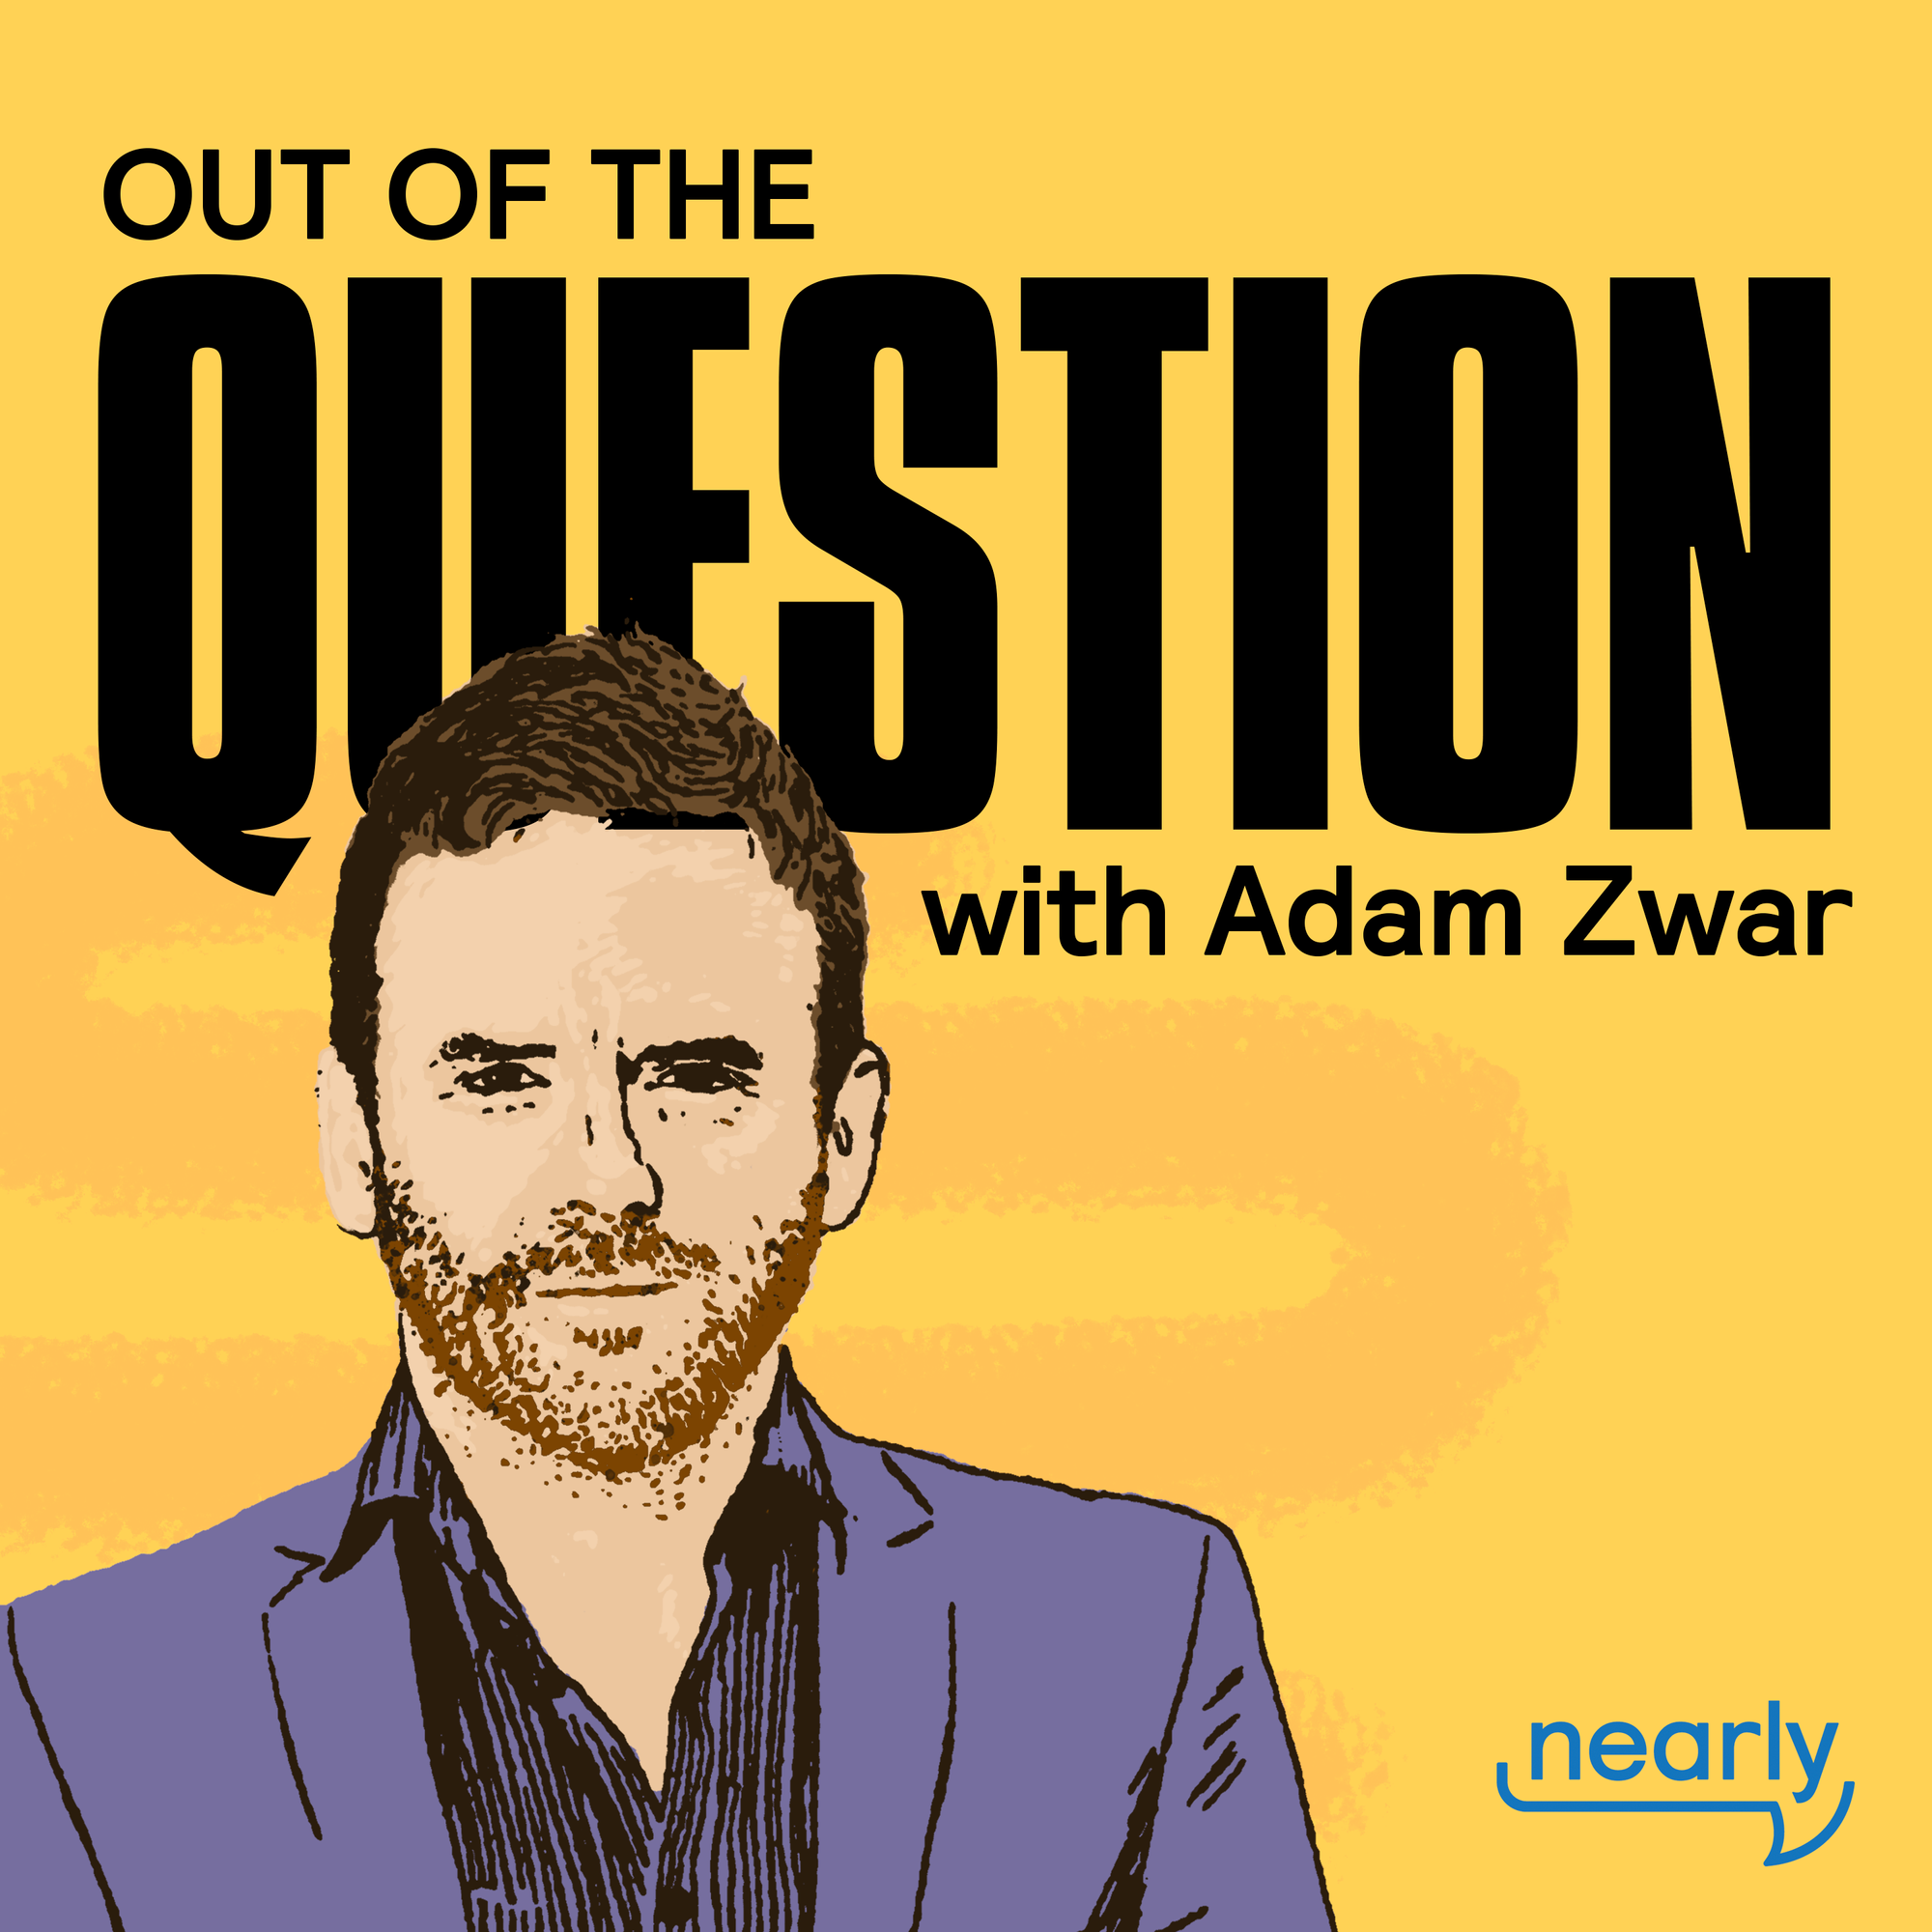 "Out of the Question" launches after 10 Questions with Adam Zwar rebrands to expand